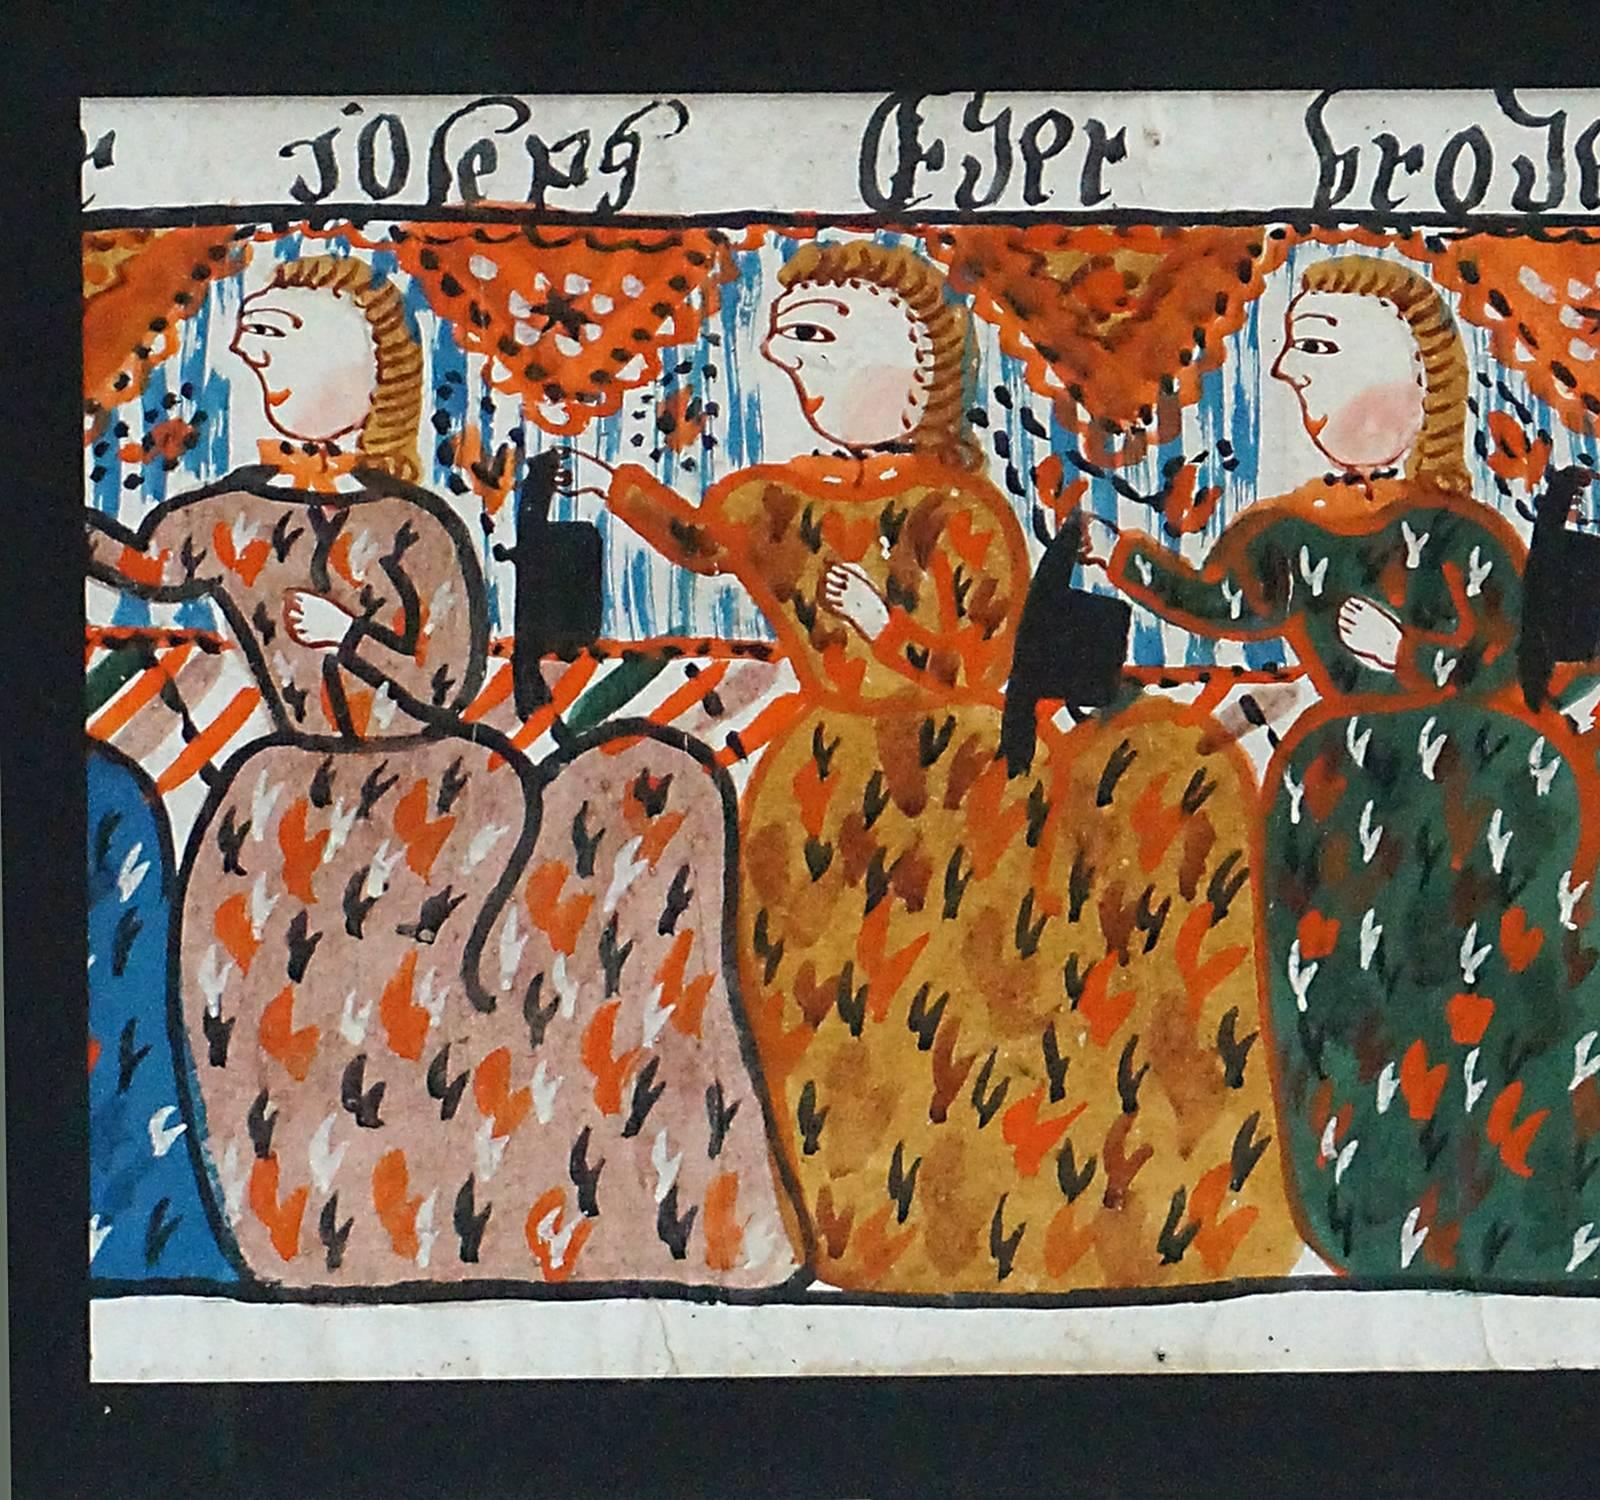 Portion of a larger bonad, Sweden, circa 1820, showing six of Joseph’s brothers in Egypt. From the Sunnerbo school, tempera on paper, archivally framed.